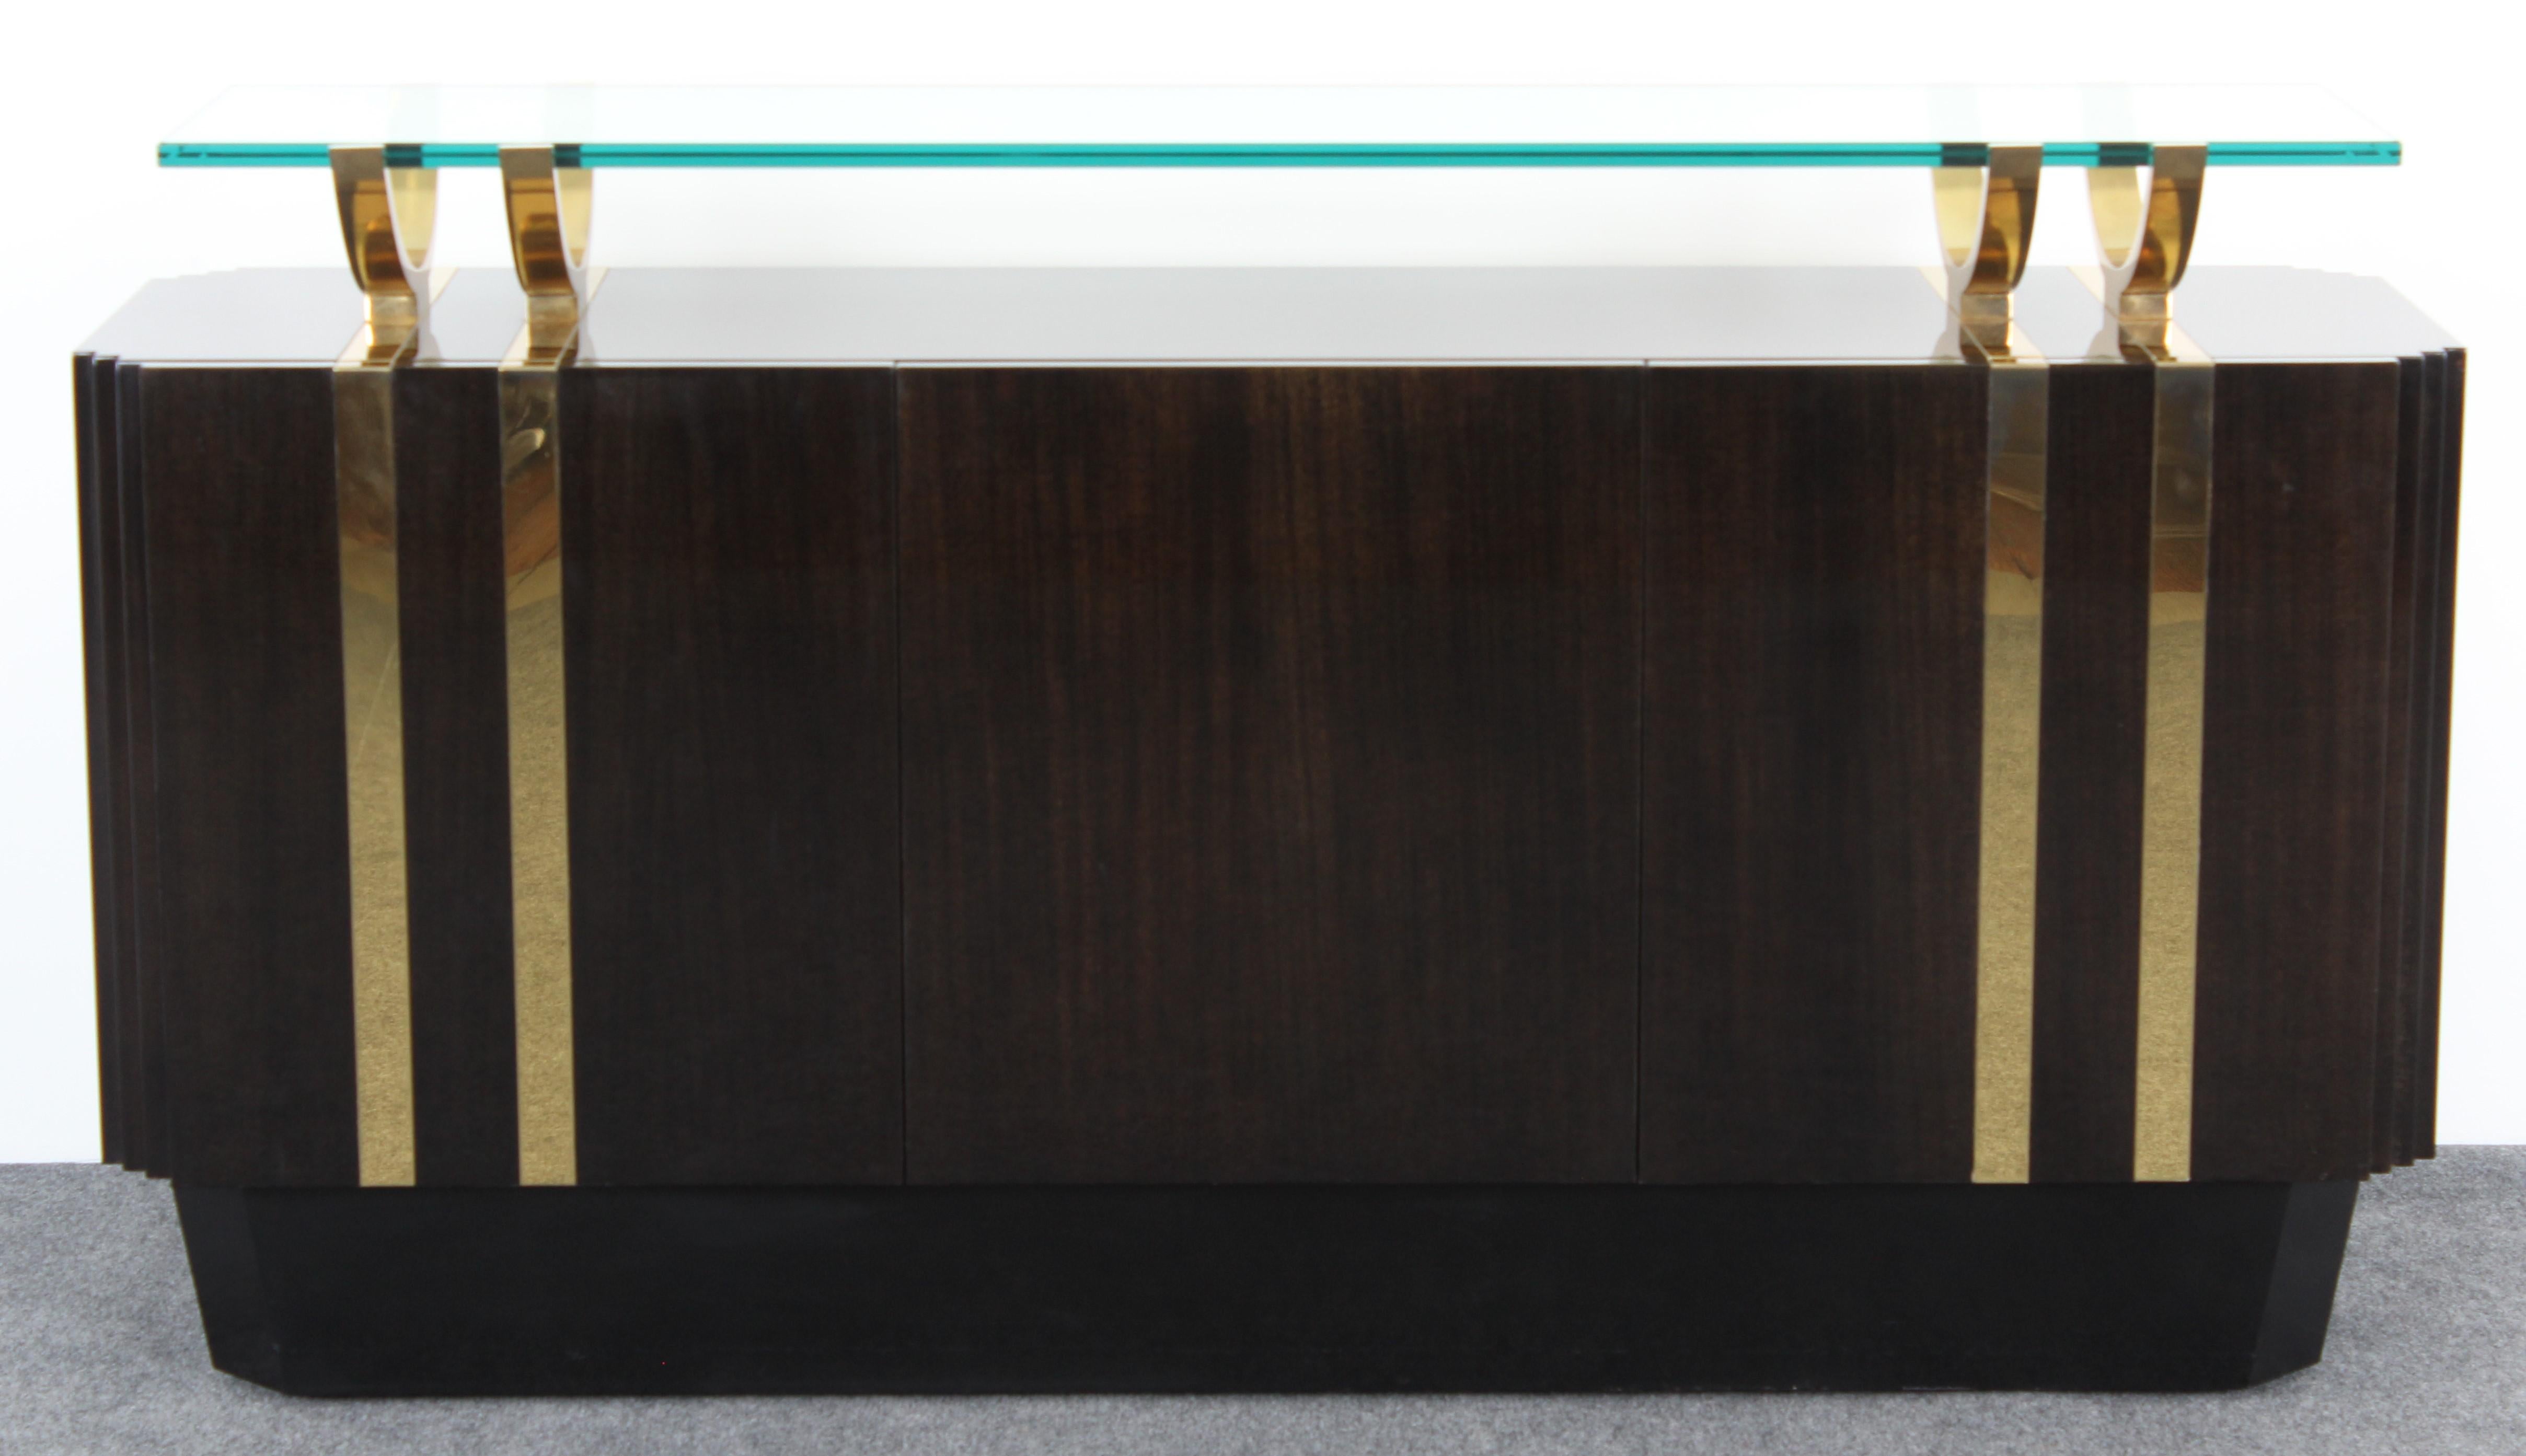 A wonderful, rich credenza with vertical and 